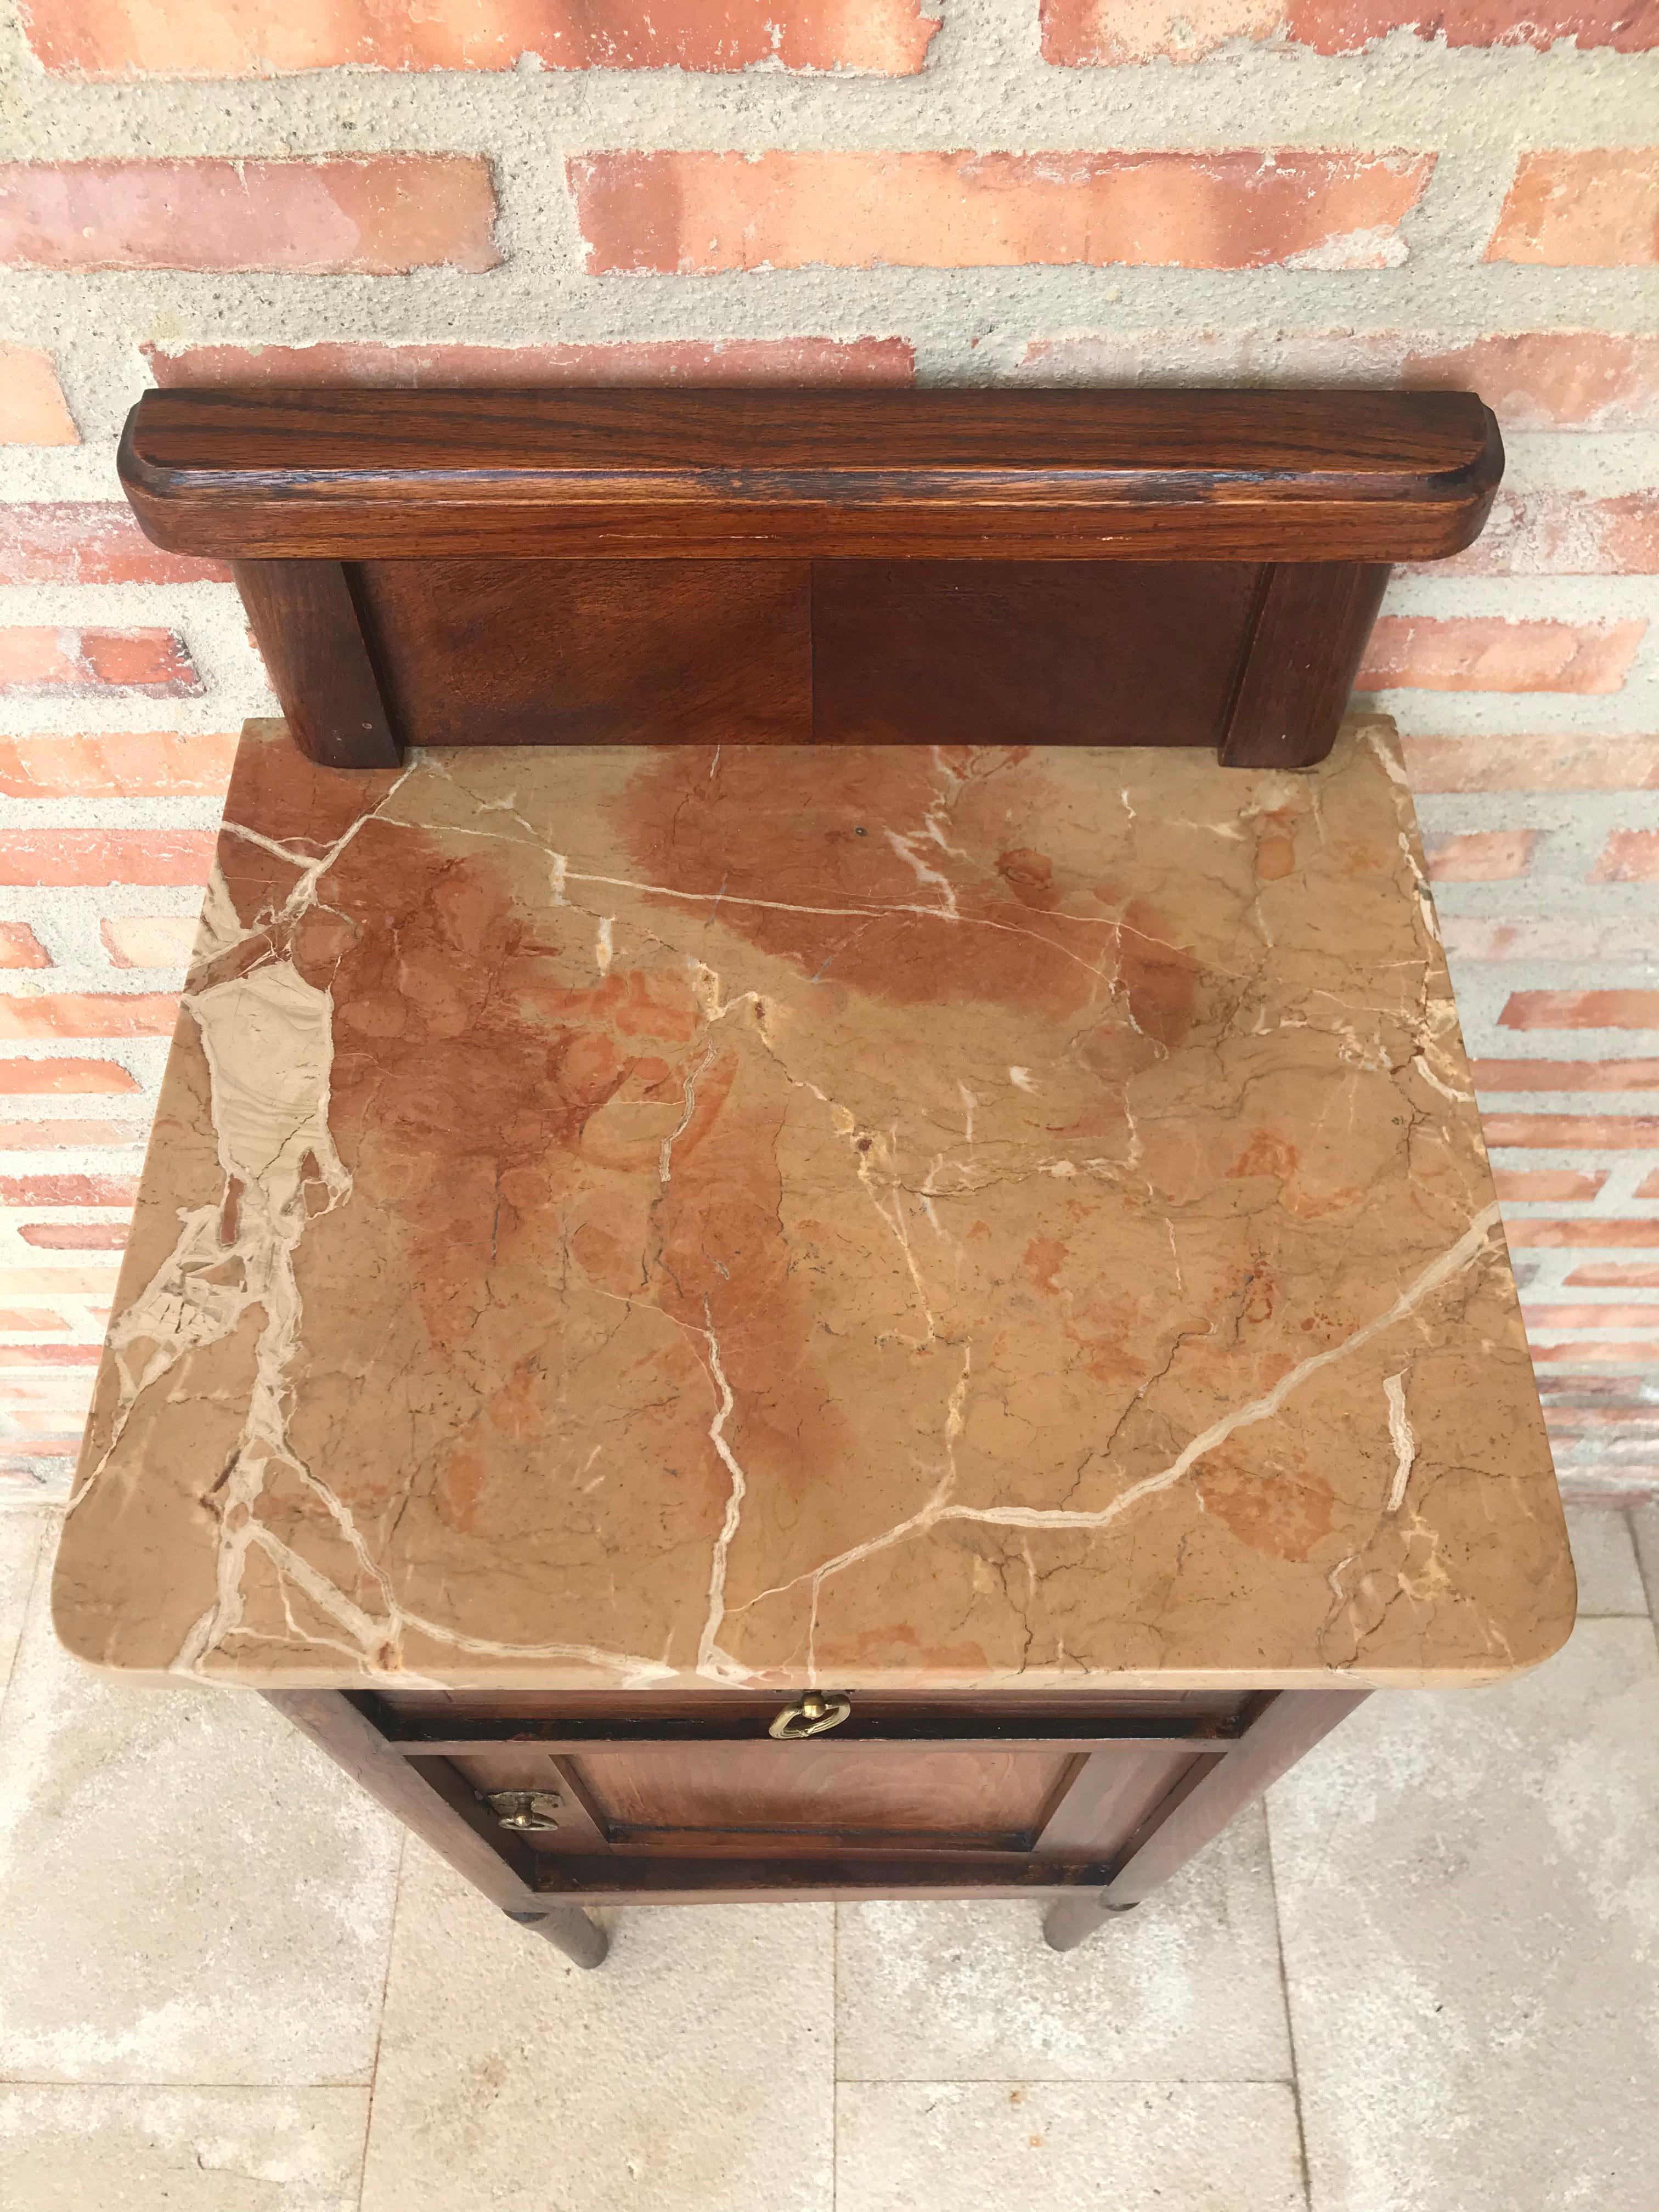 20th Century Art Nouveau Walnut Nightstand with Crest, Marble Top and Glass Shelve